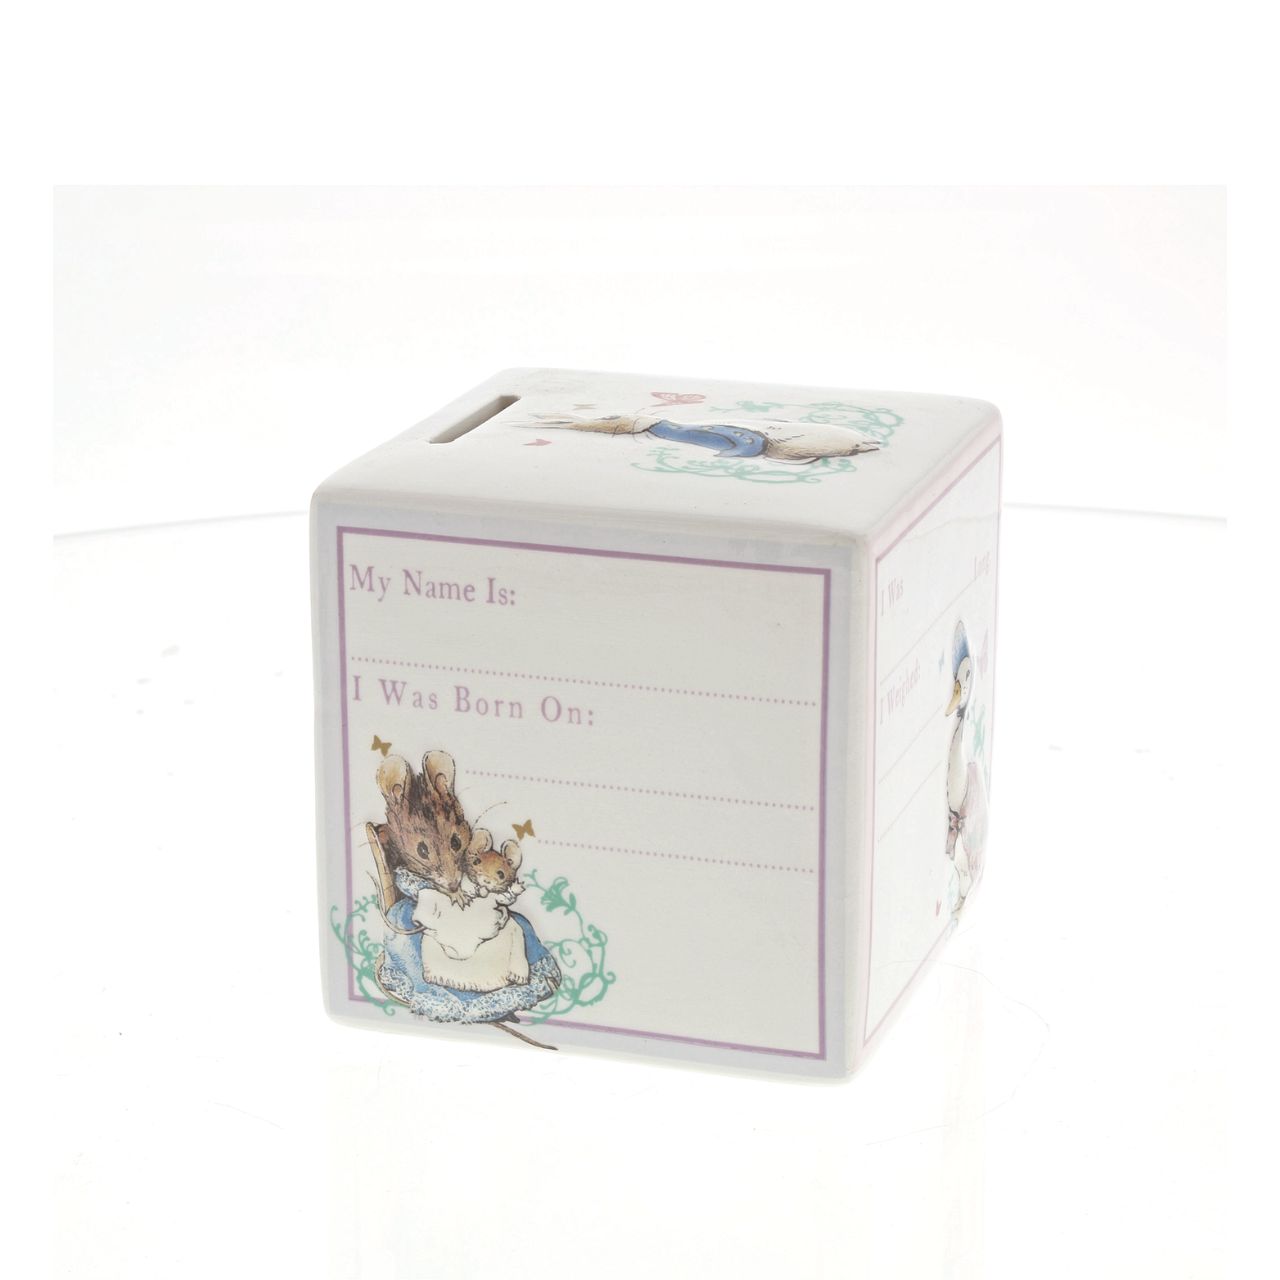 Our classic Peter Rabbit new baby money bank would make a wonderful christening gift, or even birthday gift. Encourage little ones to look after those precious pennies, with their very own money bank. Enesco has been producing The World of Beatrix Potter giftware since being granted a licence in 1987, since then the collection has grown to include many different formats.